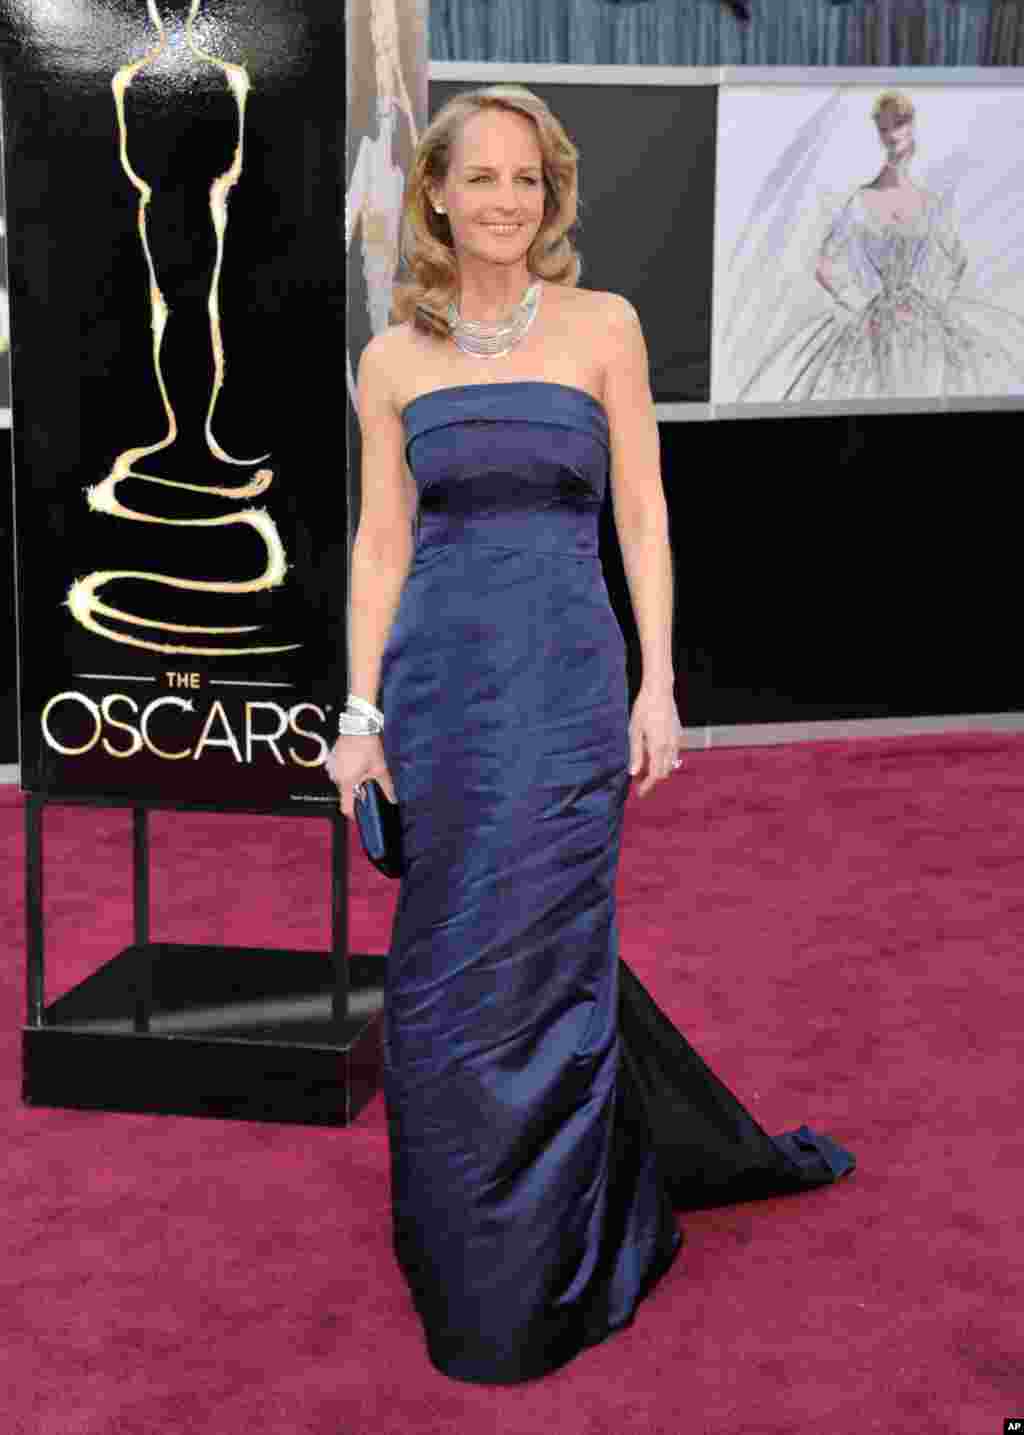 Actress Helen Hunt arrives at the Oscars at the Dolby Theatre on Feb. 24, 2013, in Los Angeles.